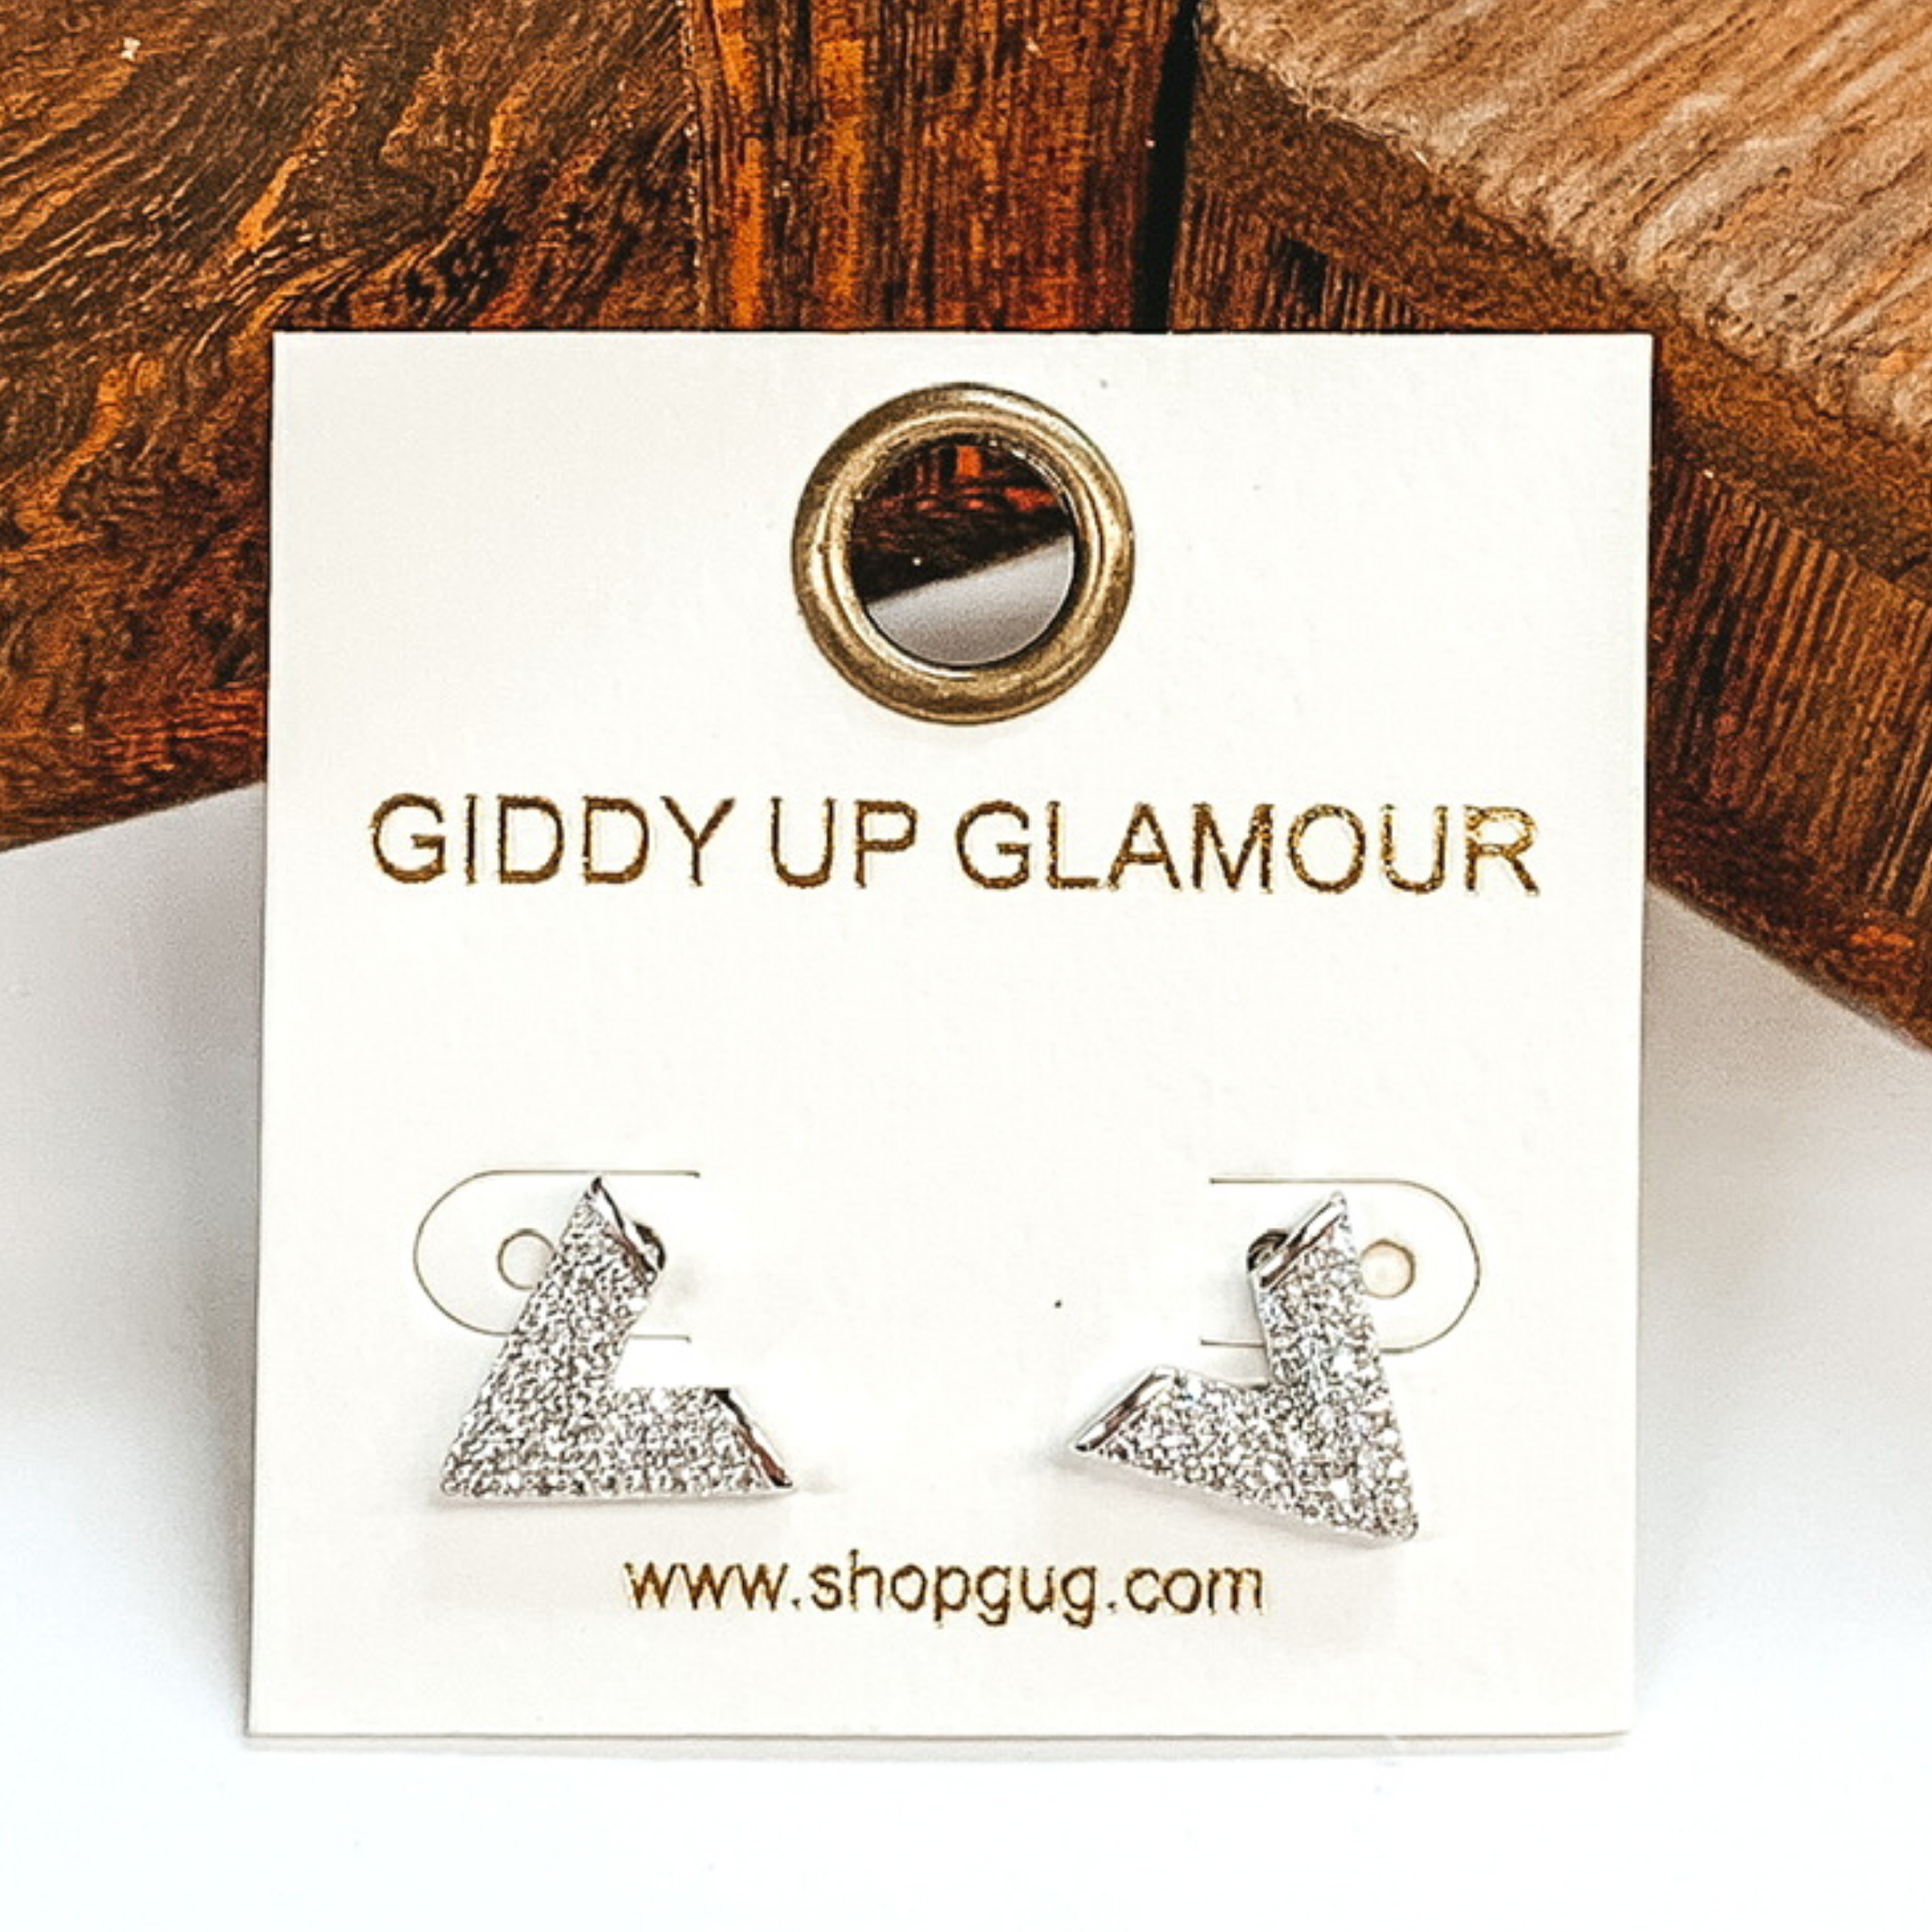 Small, silver "V" shaped stud earrings with clear crystals. These earrings are pictured on a white earrings card on a white and brown background.